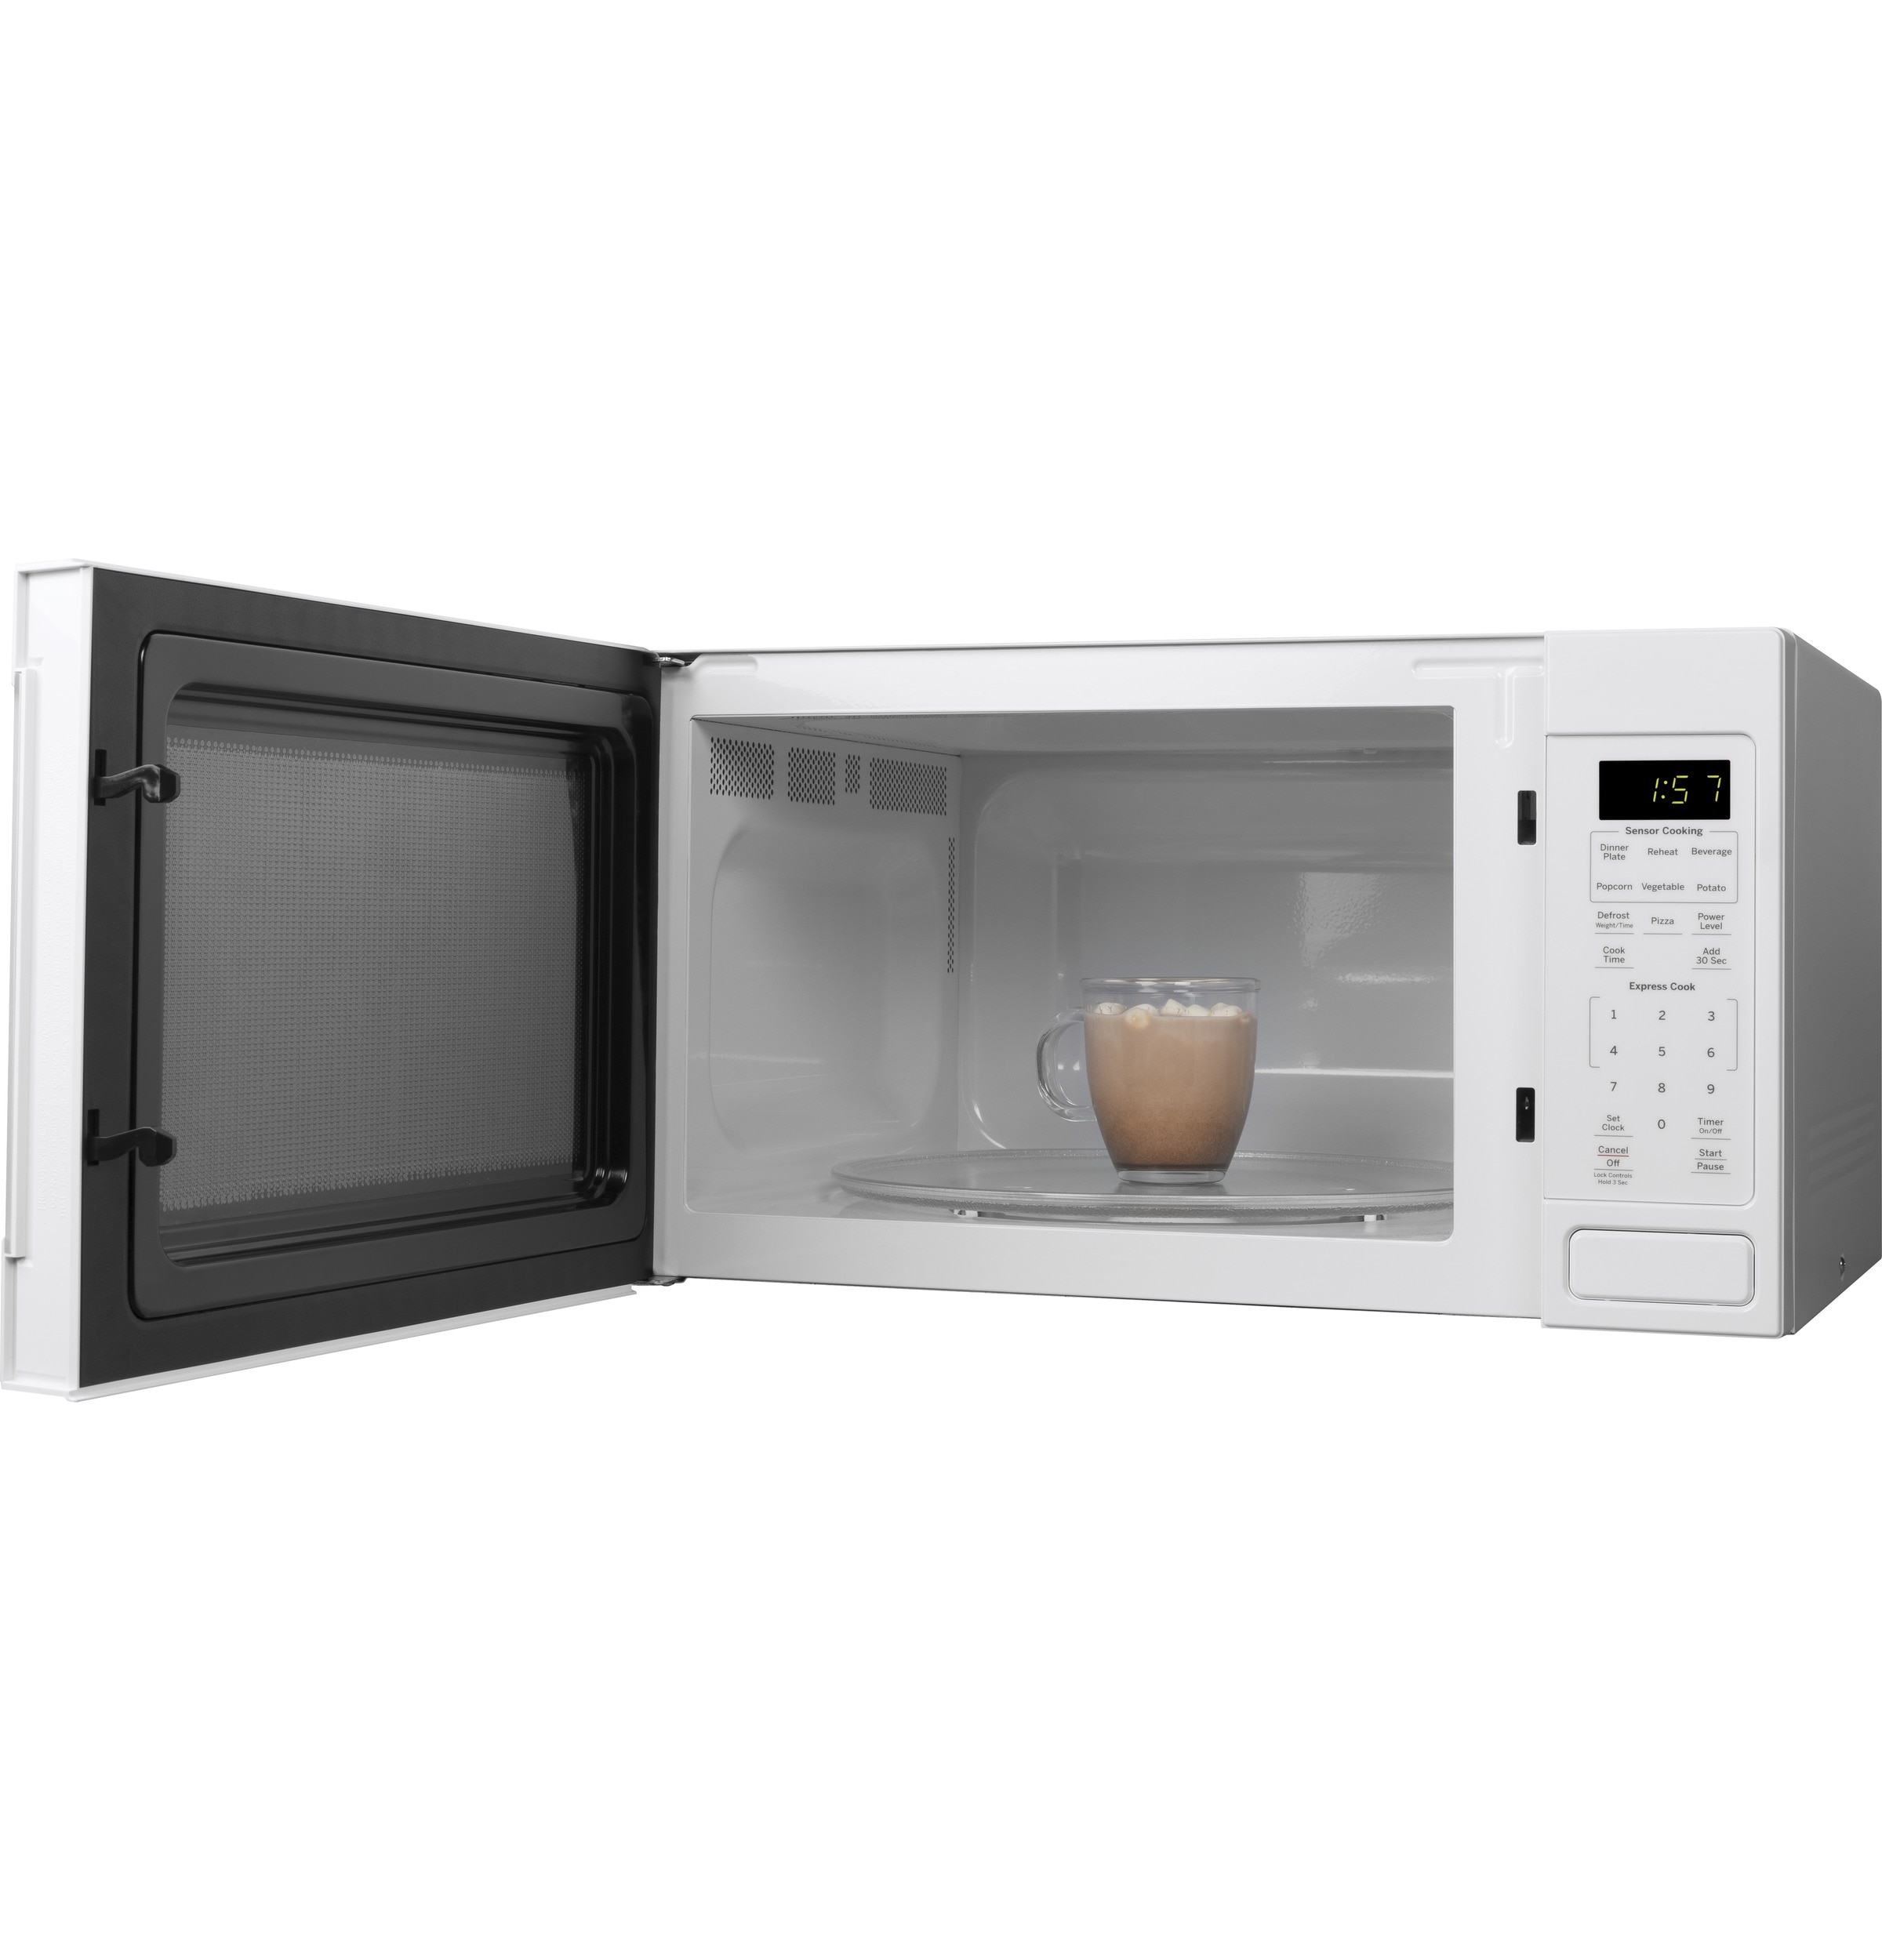 White Full Size Microwave For Sale Cheap Today In New Condition